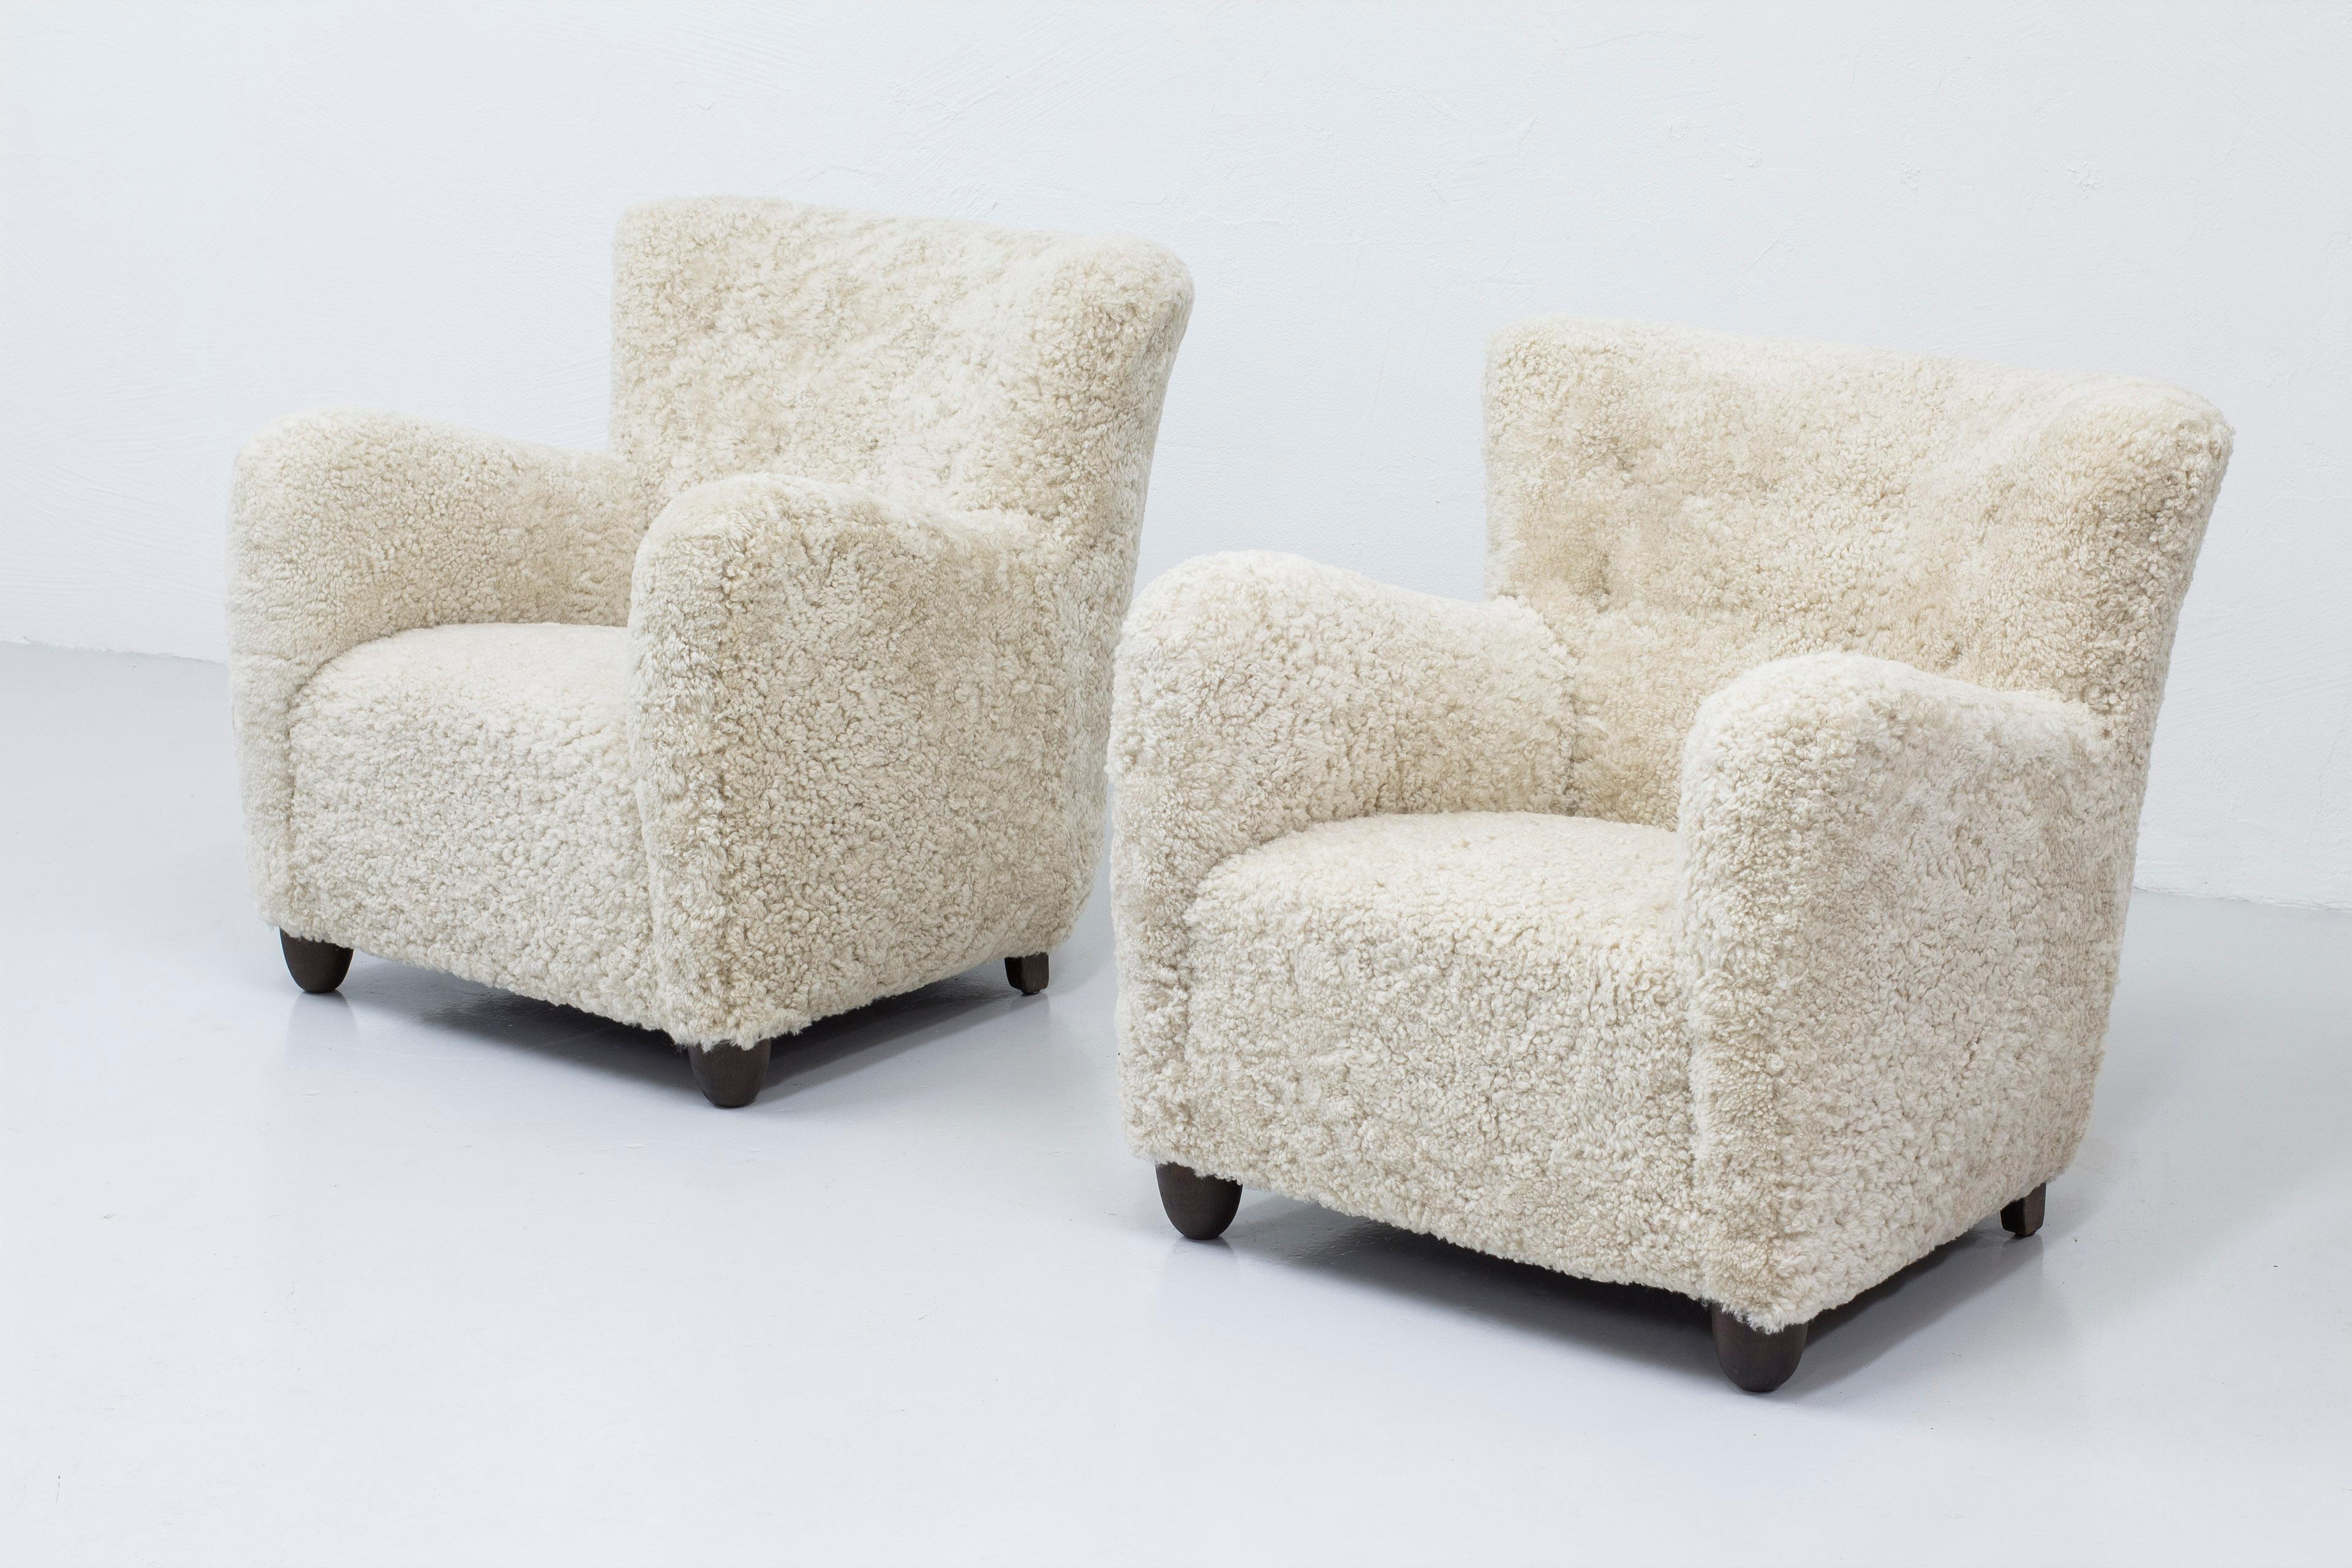 Mid-20th Century Lounge Chairs in the Manner of Flemming Lassen, Denmark, 1940-50s